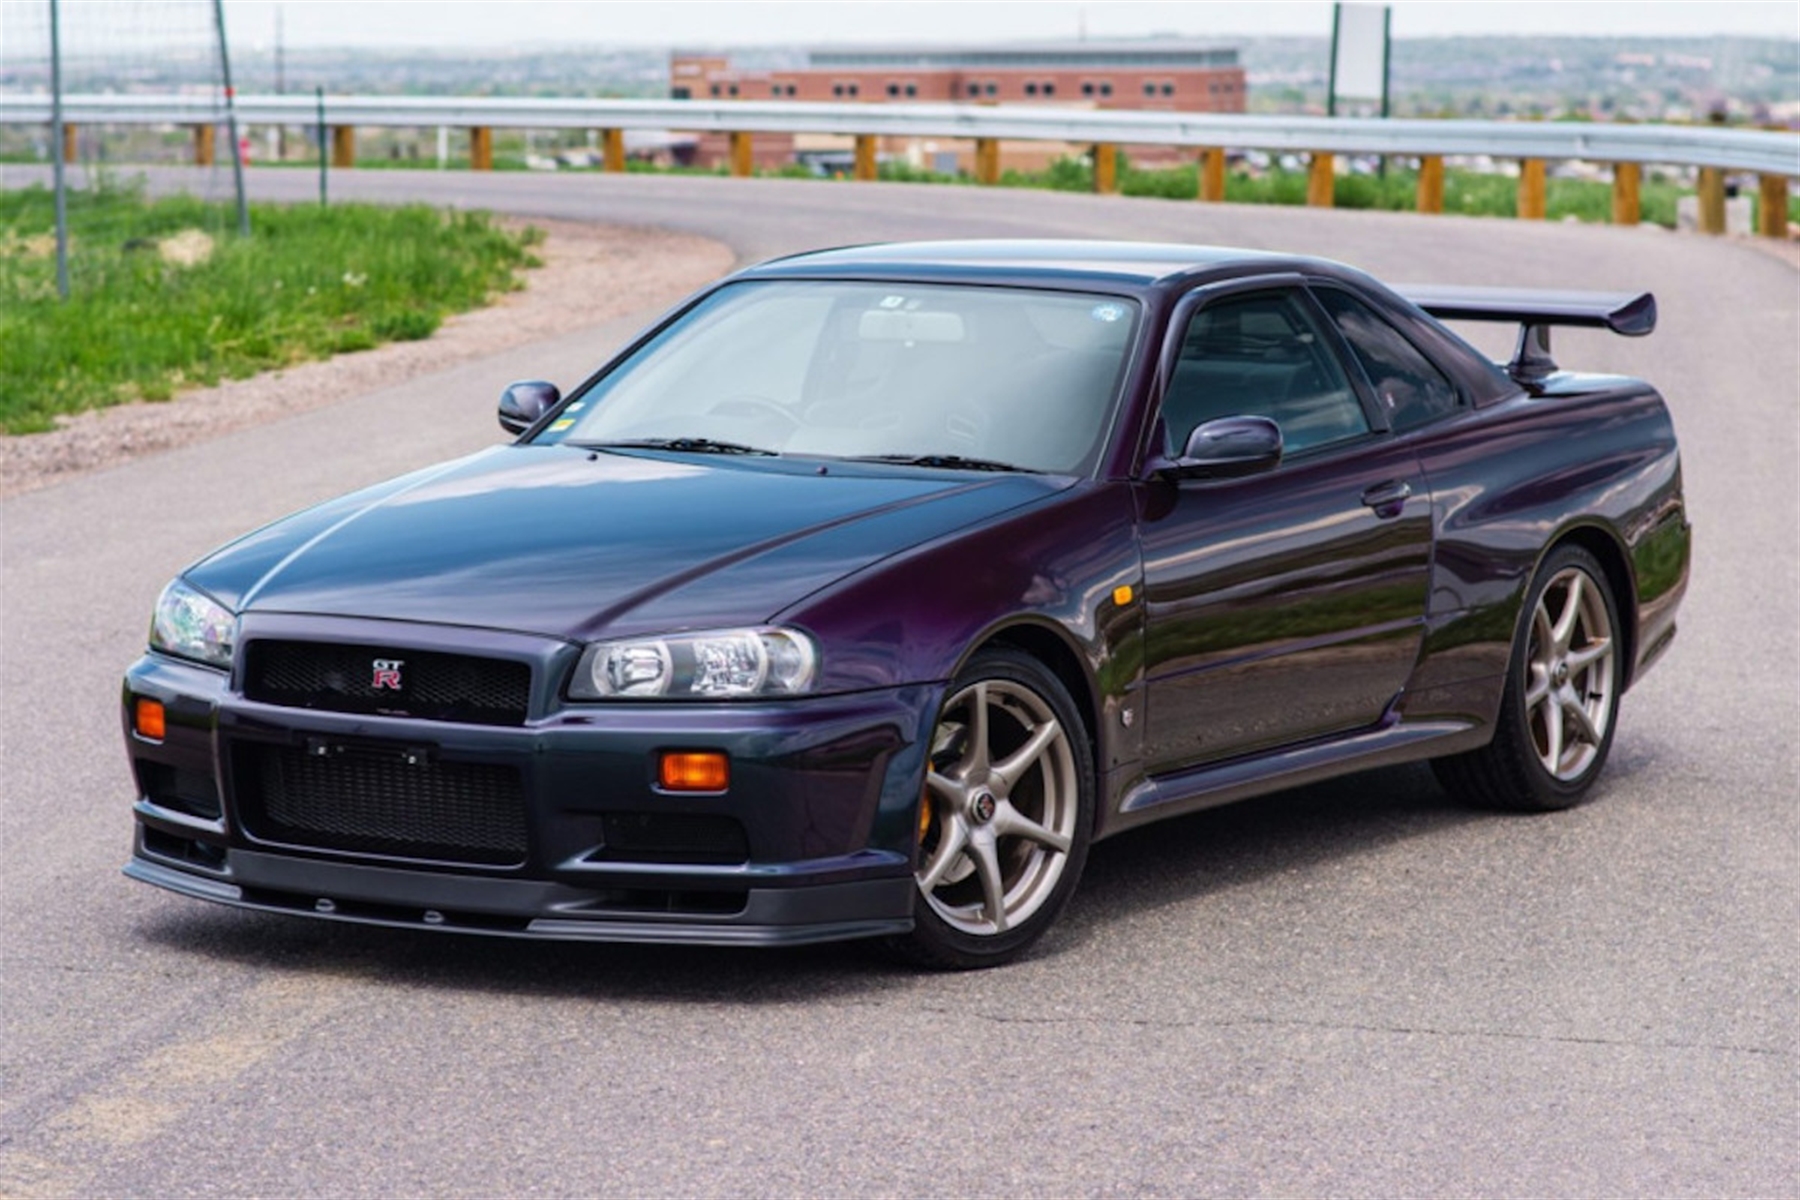 Nissan's red-hot R34 Skyline GT-R will soon invade the U.S. market